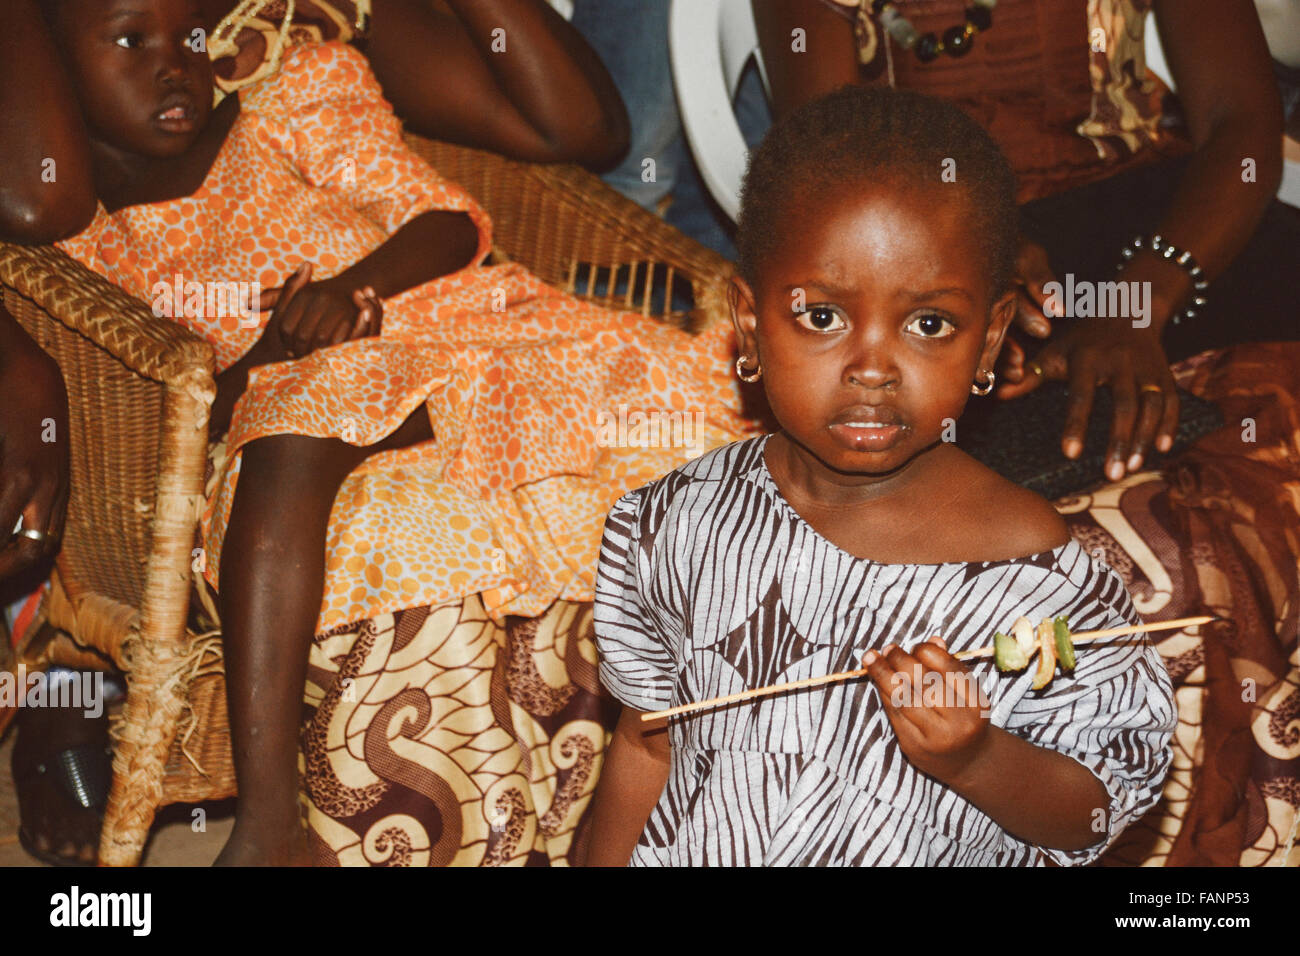 A little girl from Gambia holding wooden barbecue stick with vegetables on it. The girl is wearing blue pattern dress. Stock Photo